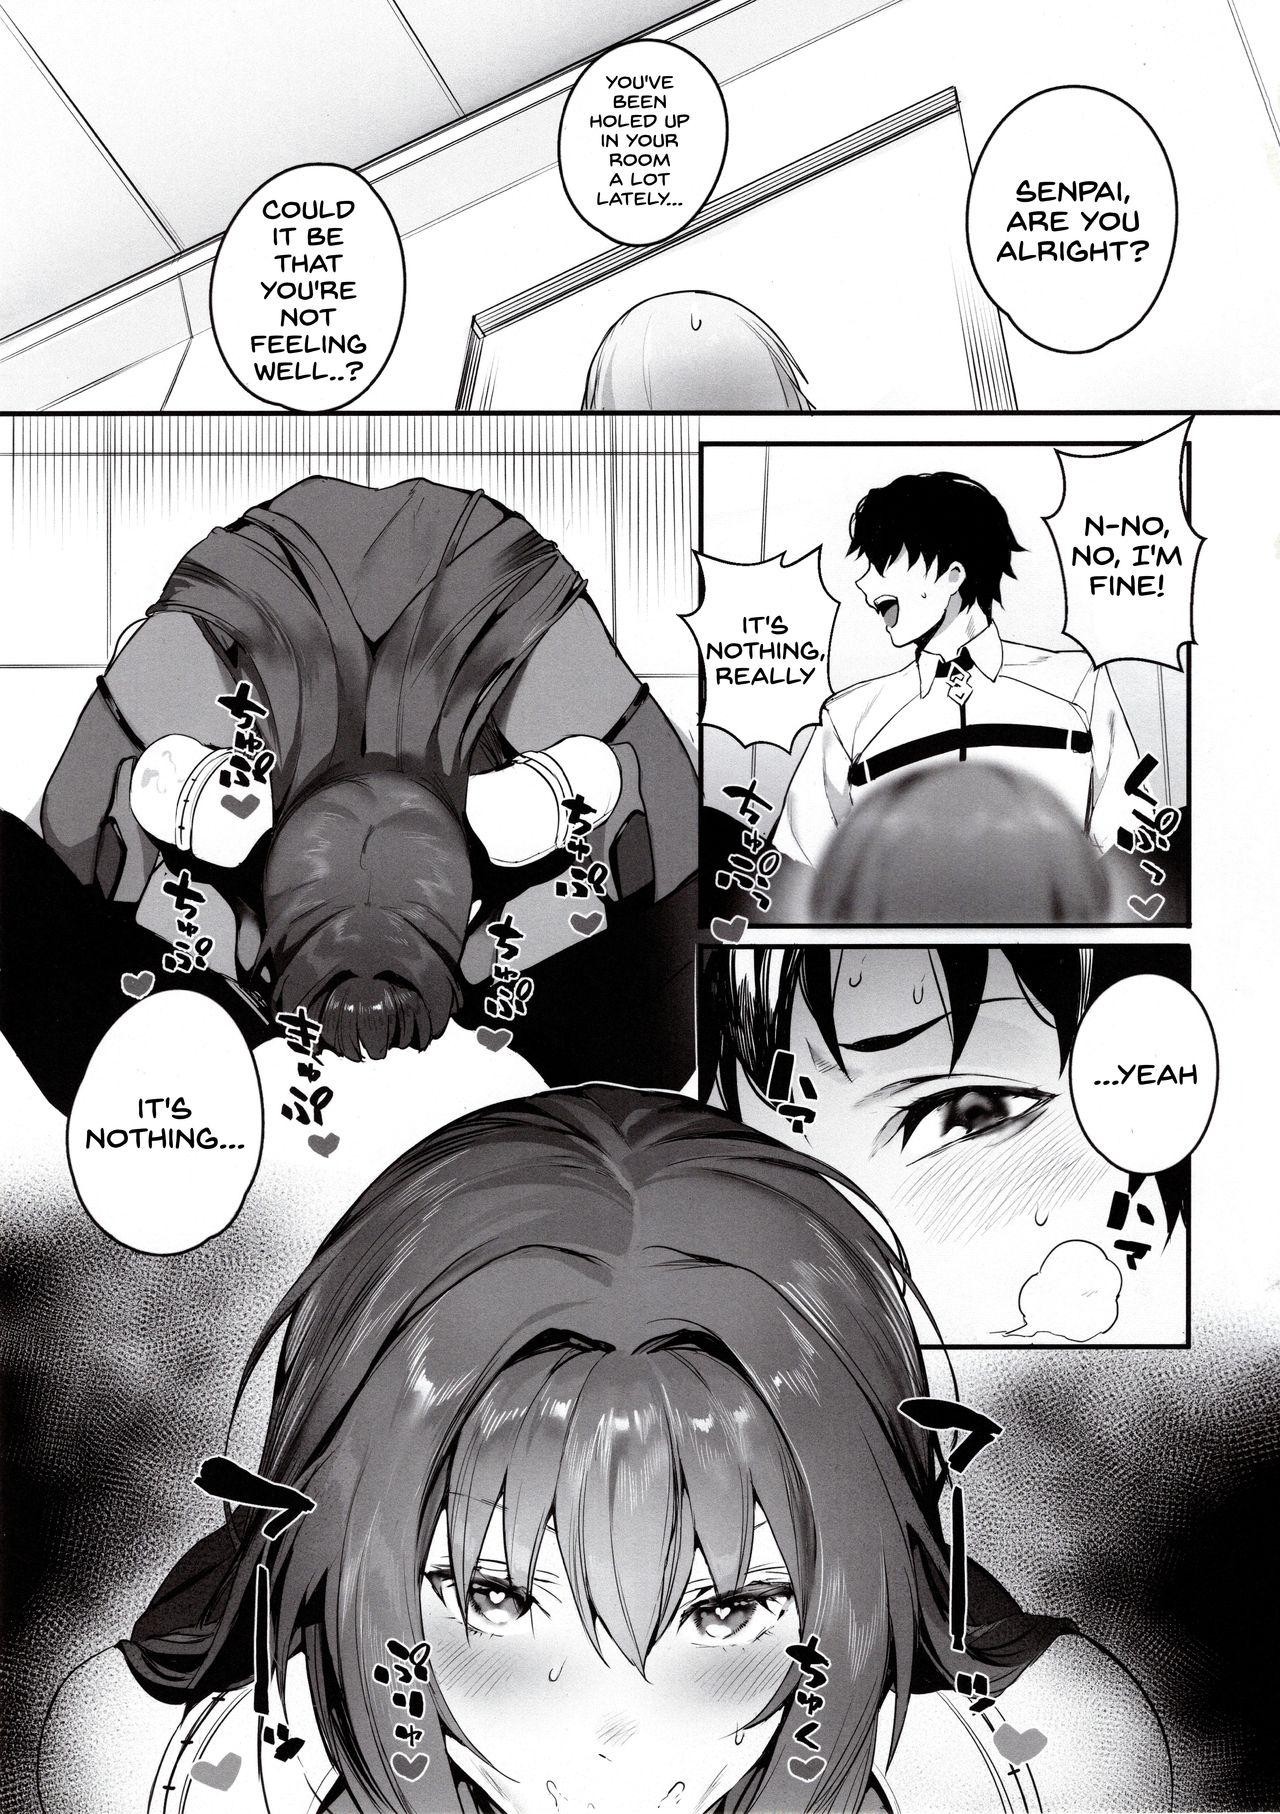 Massage MOVE ON UP - Fate grand order Gay Reality - Page 2